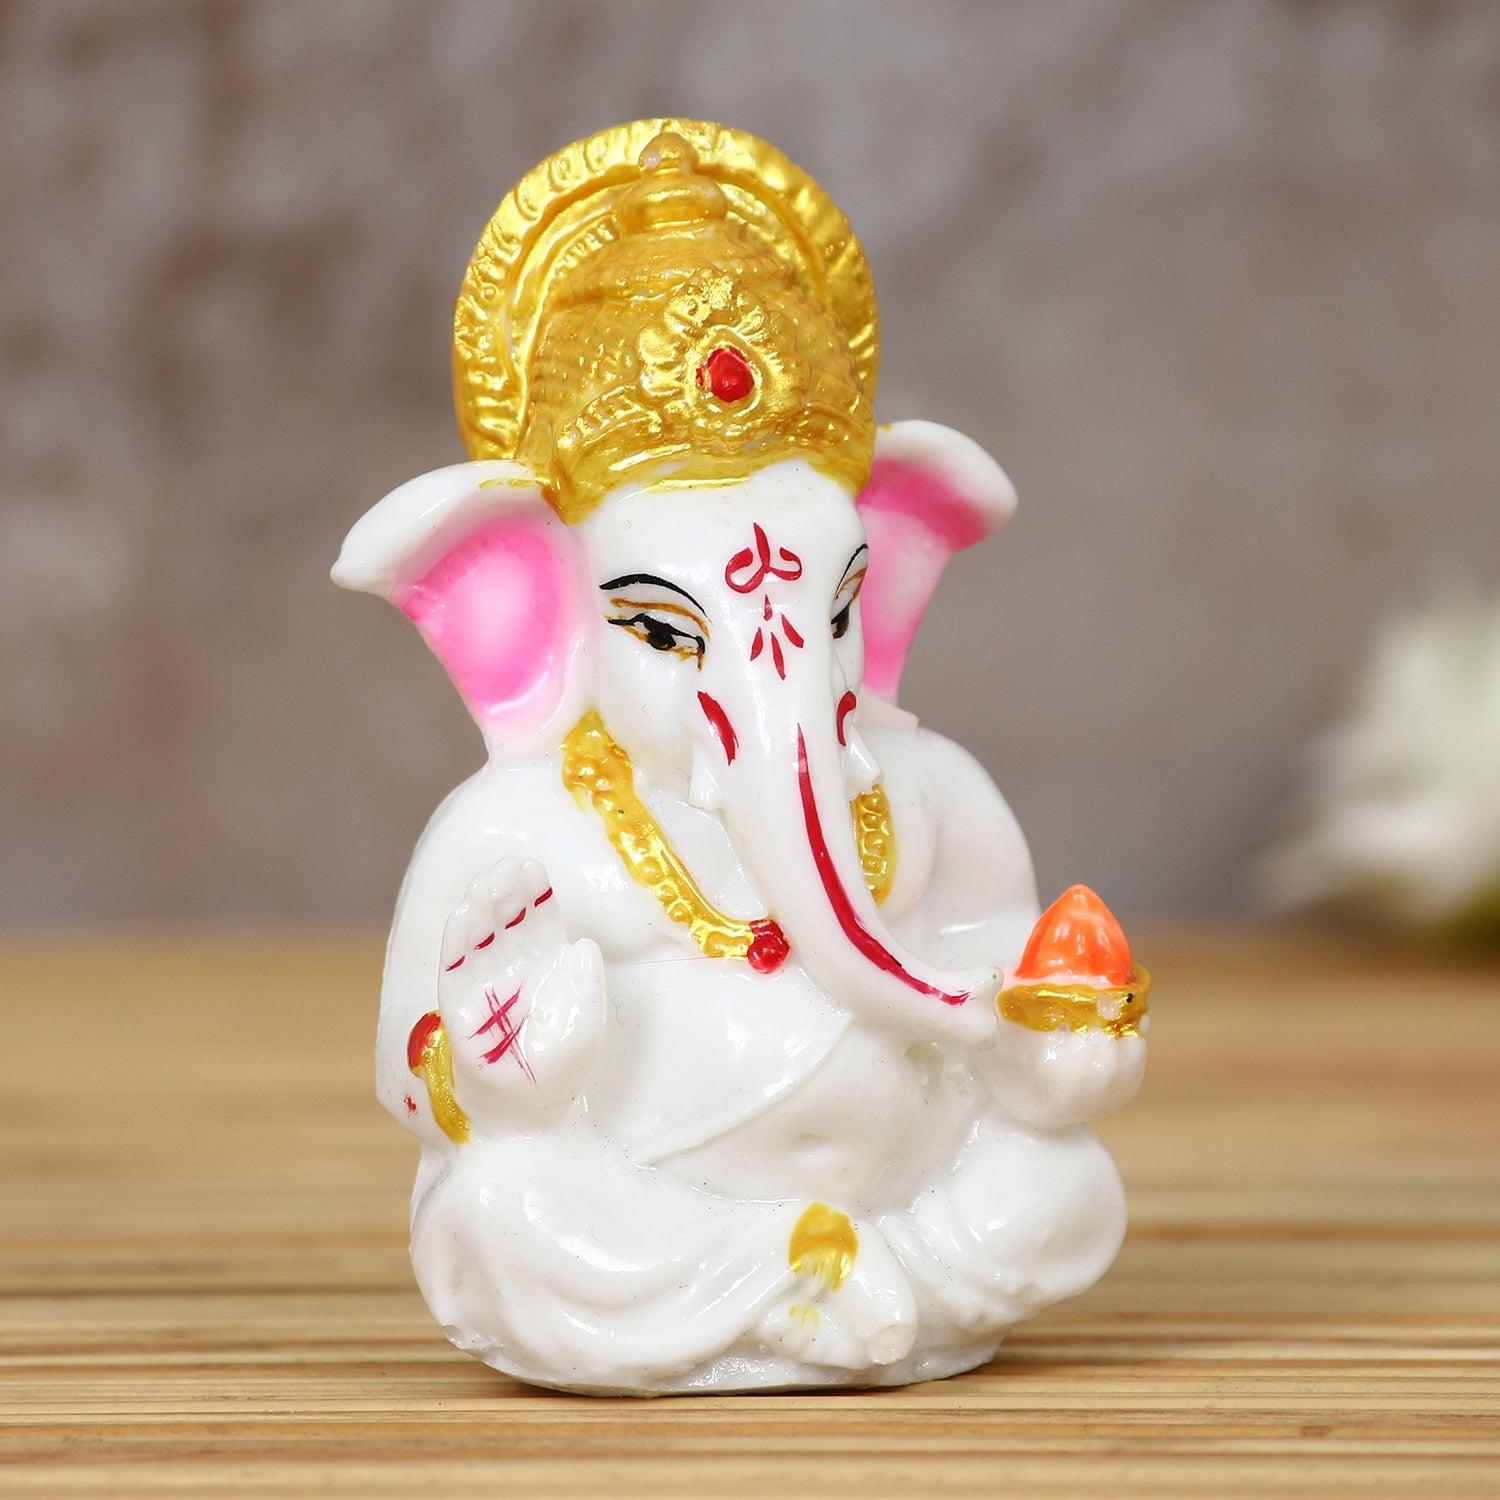 Decorative Lord Ganesha Idol for Car Dashboard, Home Temple and Office Desks